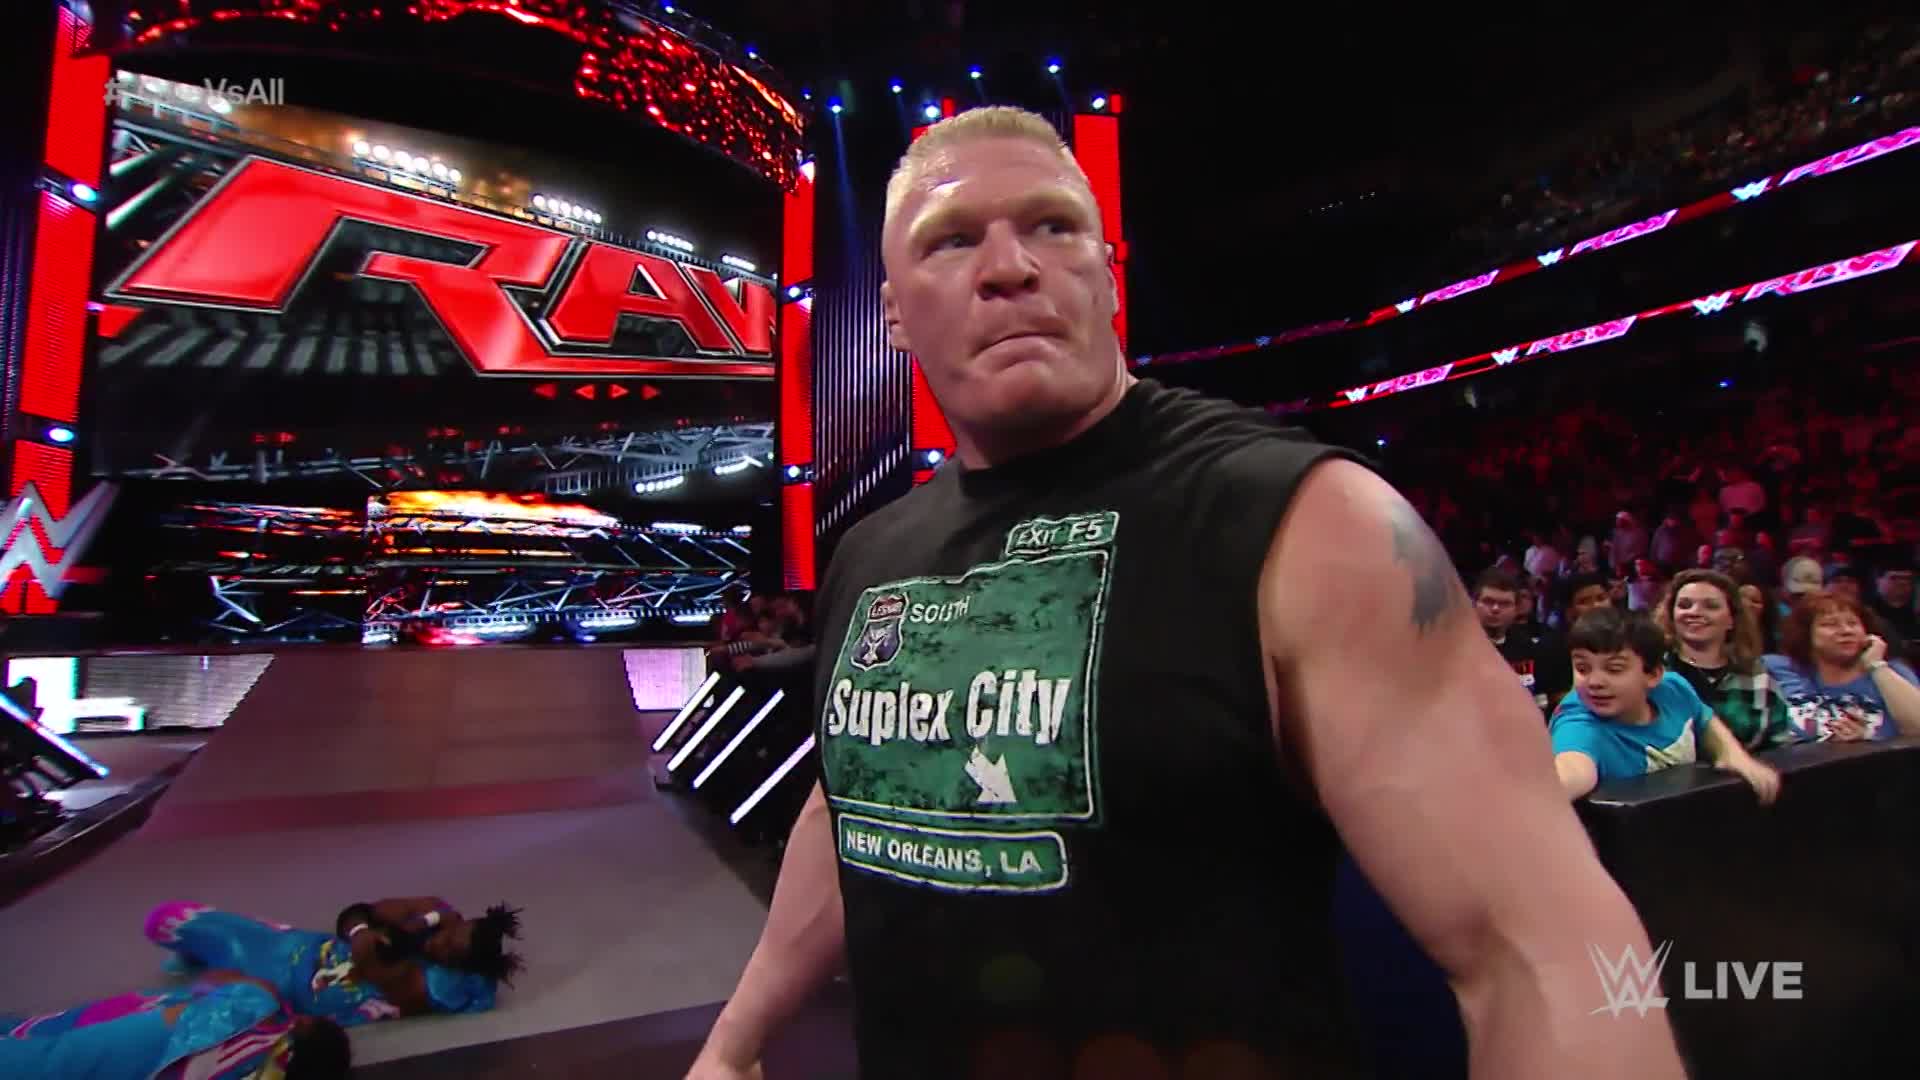 WWE Raw: Brock Lesnar to compete in 2016 Royal Rumble Match. WWE